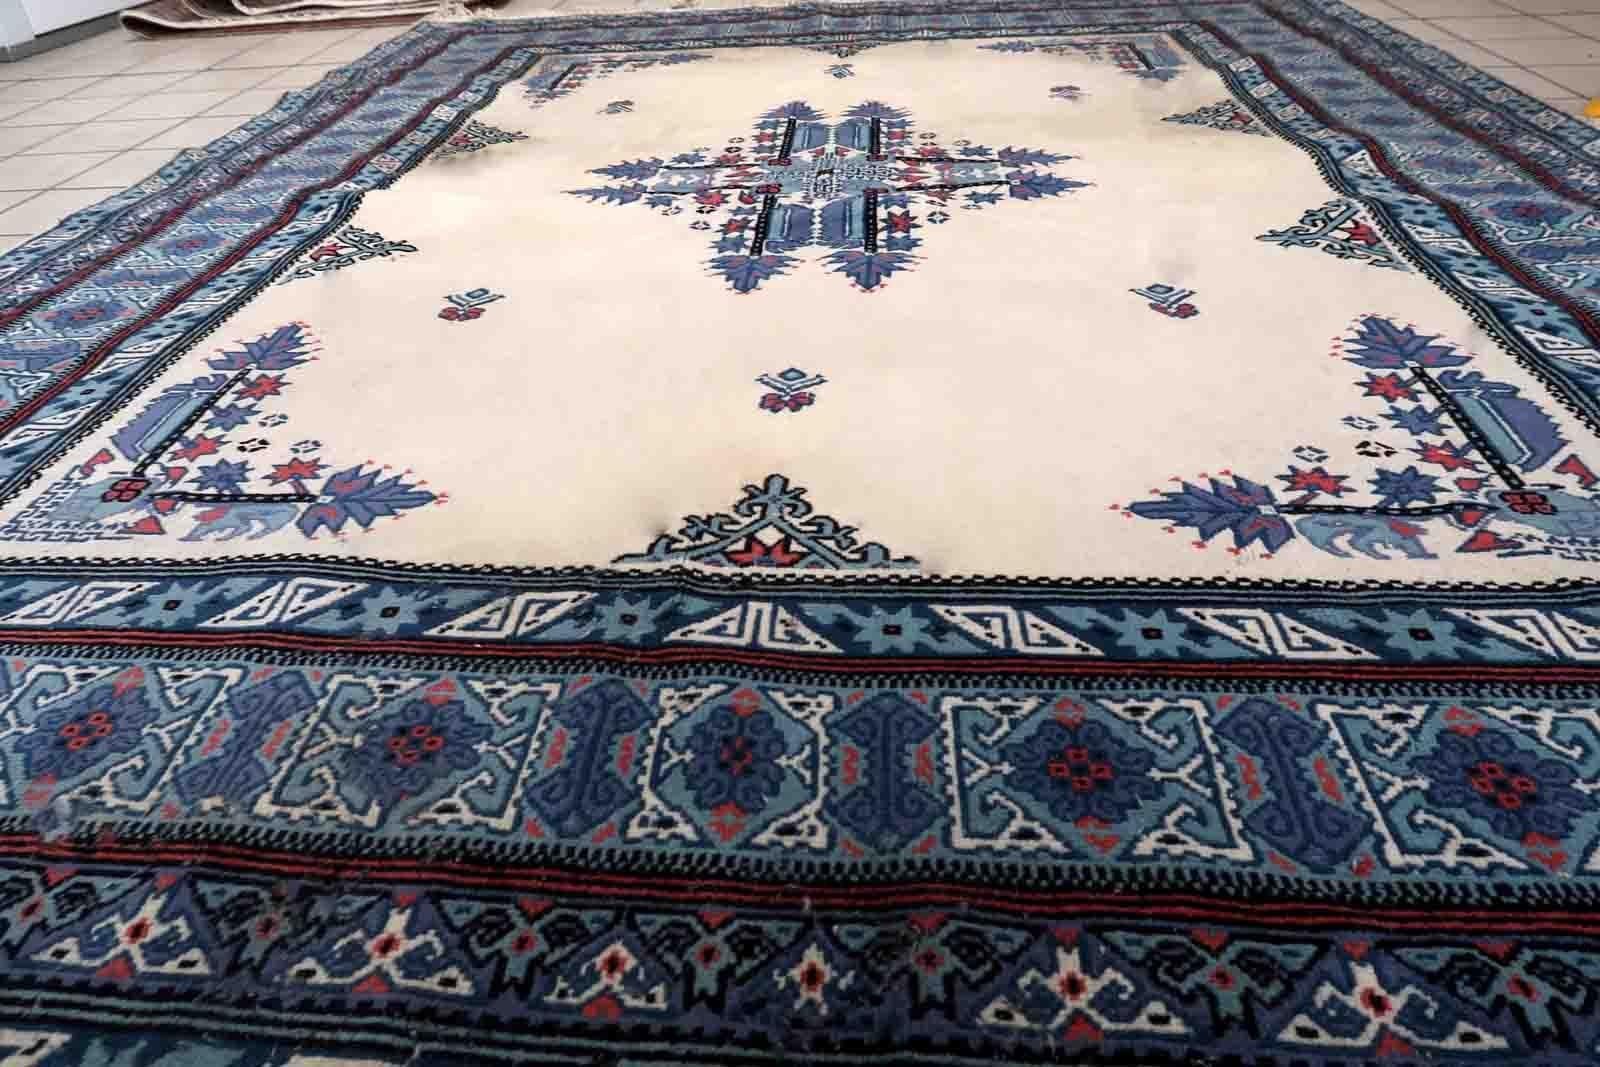 Handmade vintage Tunisian Berber rug in unusual white and blue colors. The rug is from the end of 20th century in original condition, it has some age discolorations.

-condition: original, age discolorations,

-circa: 1970s,

-size: 6.5' x